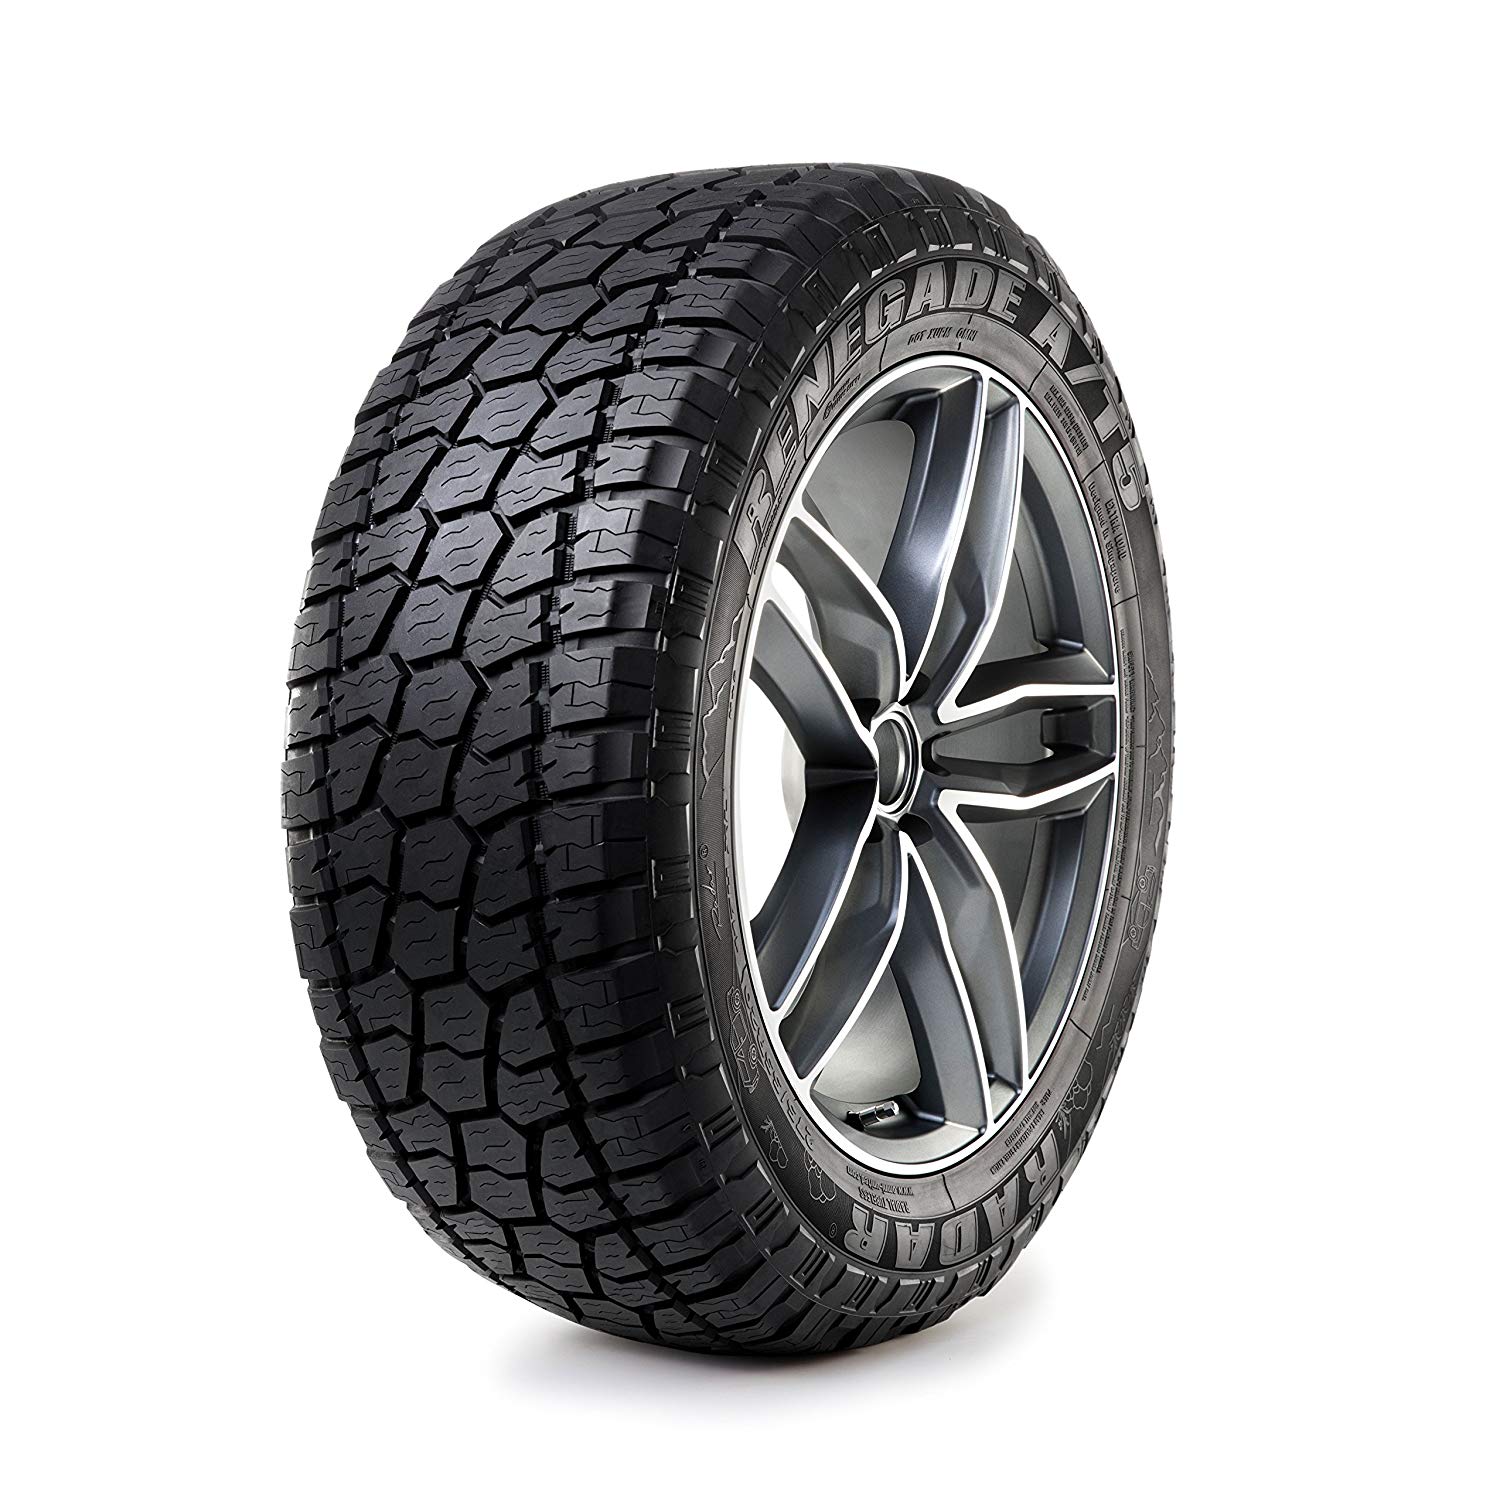 Gomme Nuove Radar 255/75 R17 111Q RENEGADE A/T (AT-5 M+S pneumatici nuovi All Season